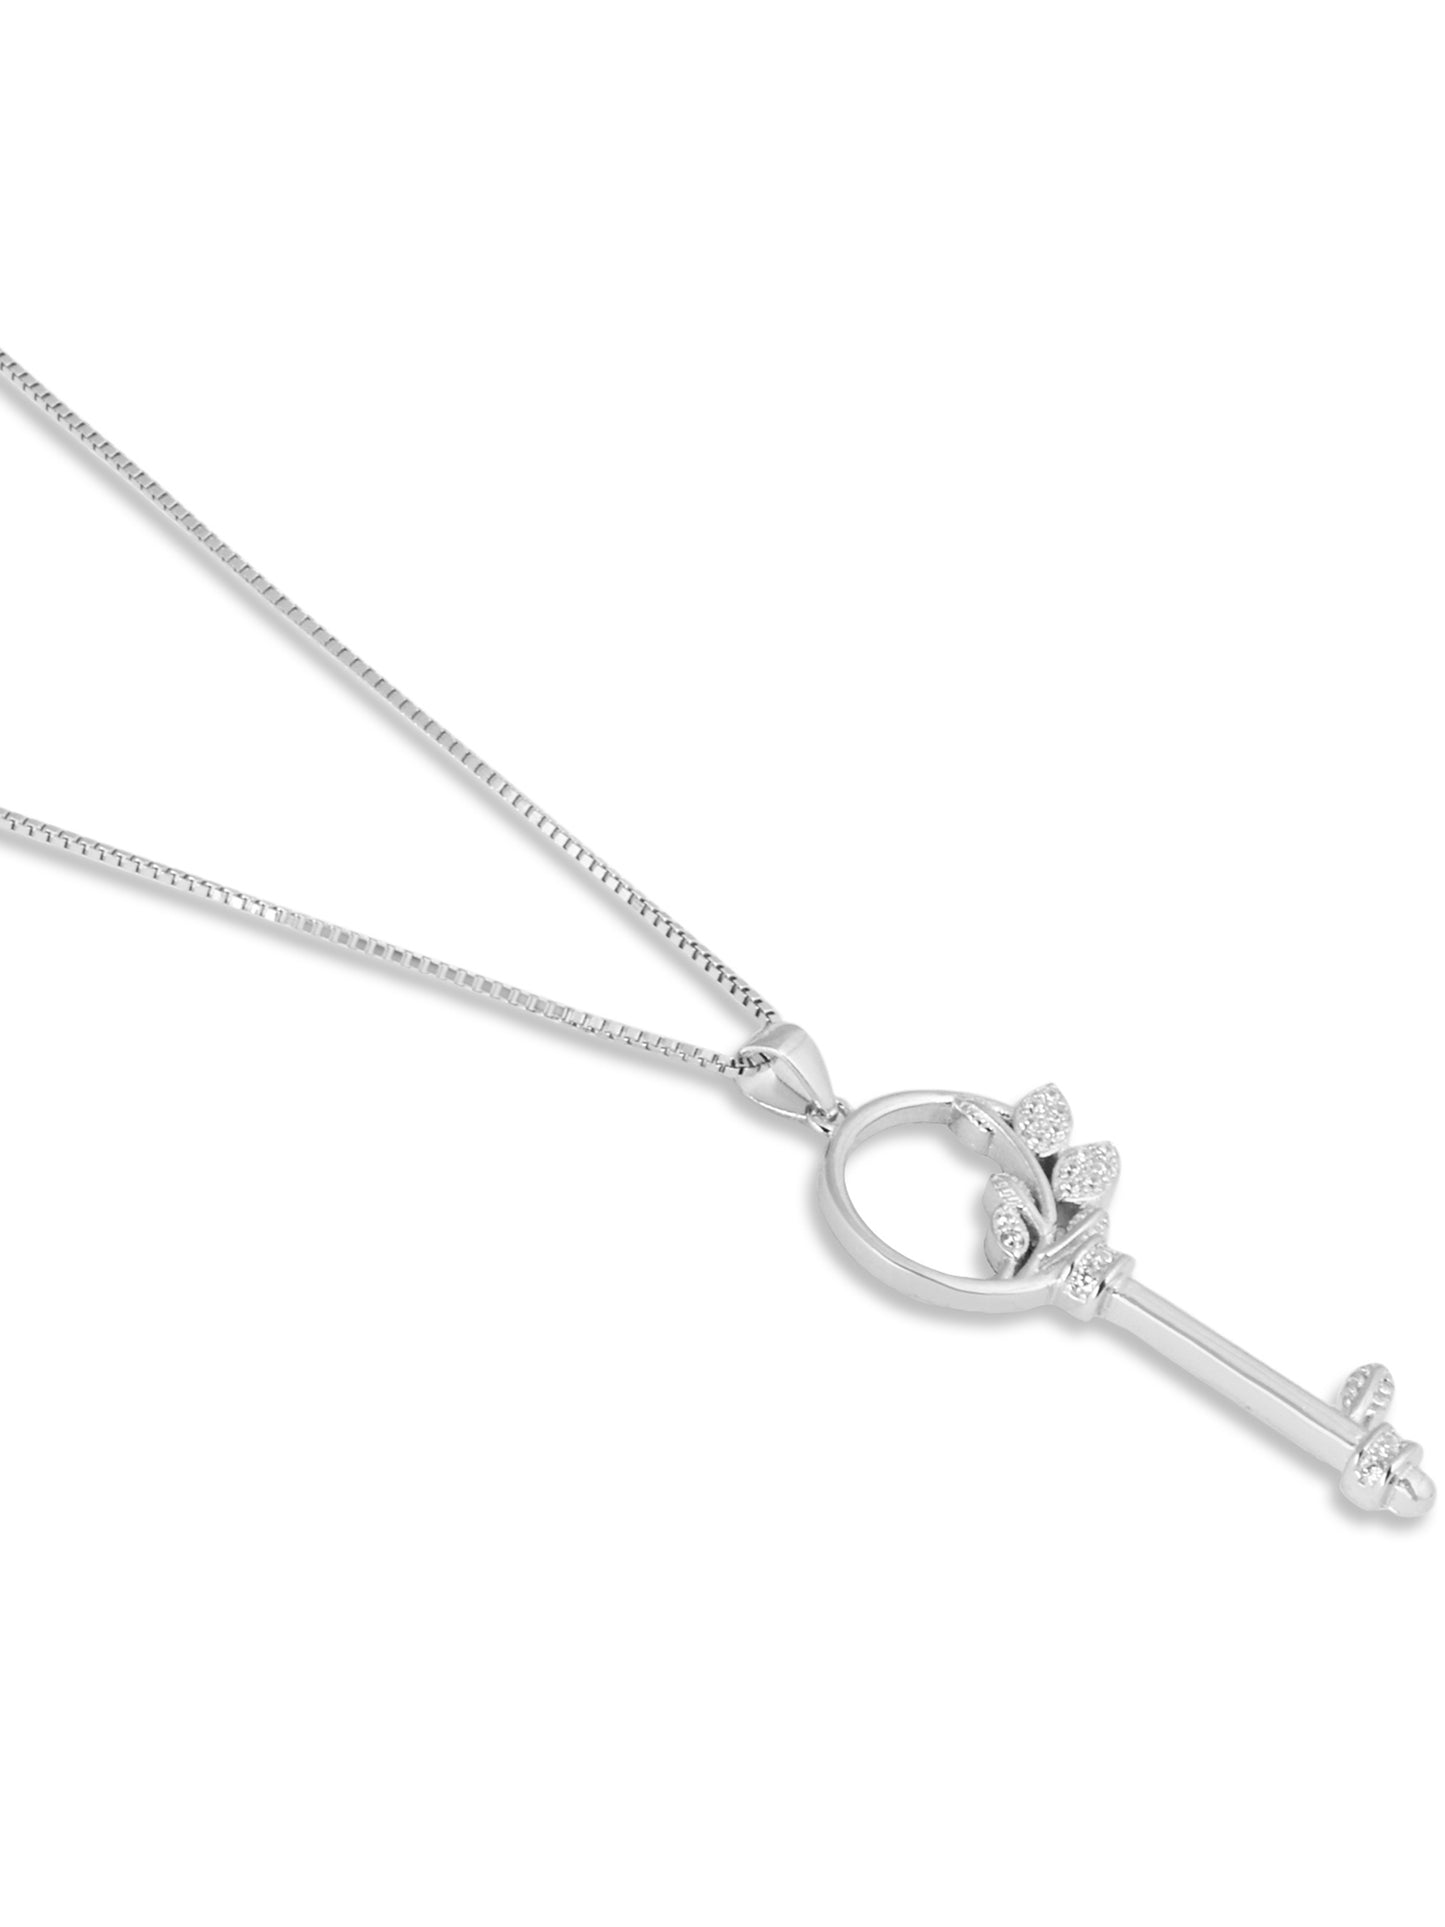 Crystal Garden Key White Gold Pendant with chain